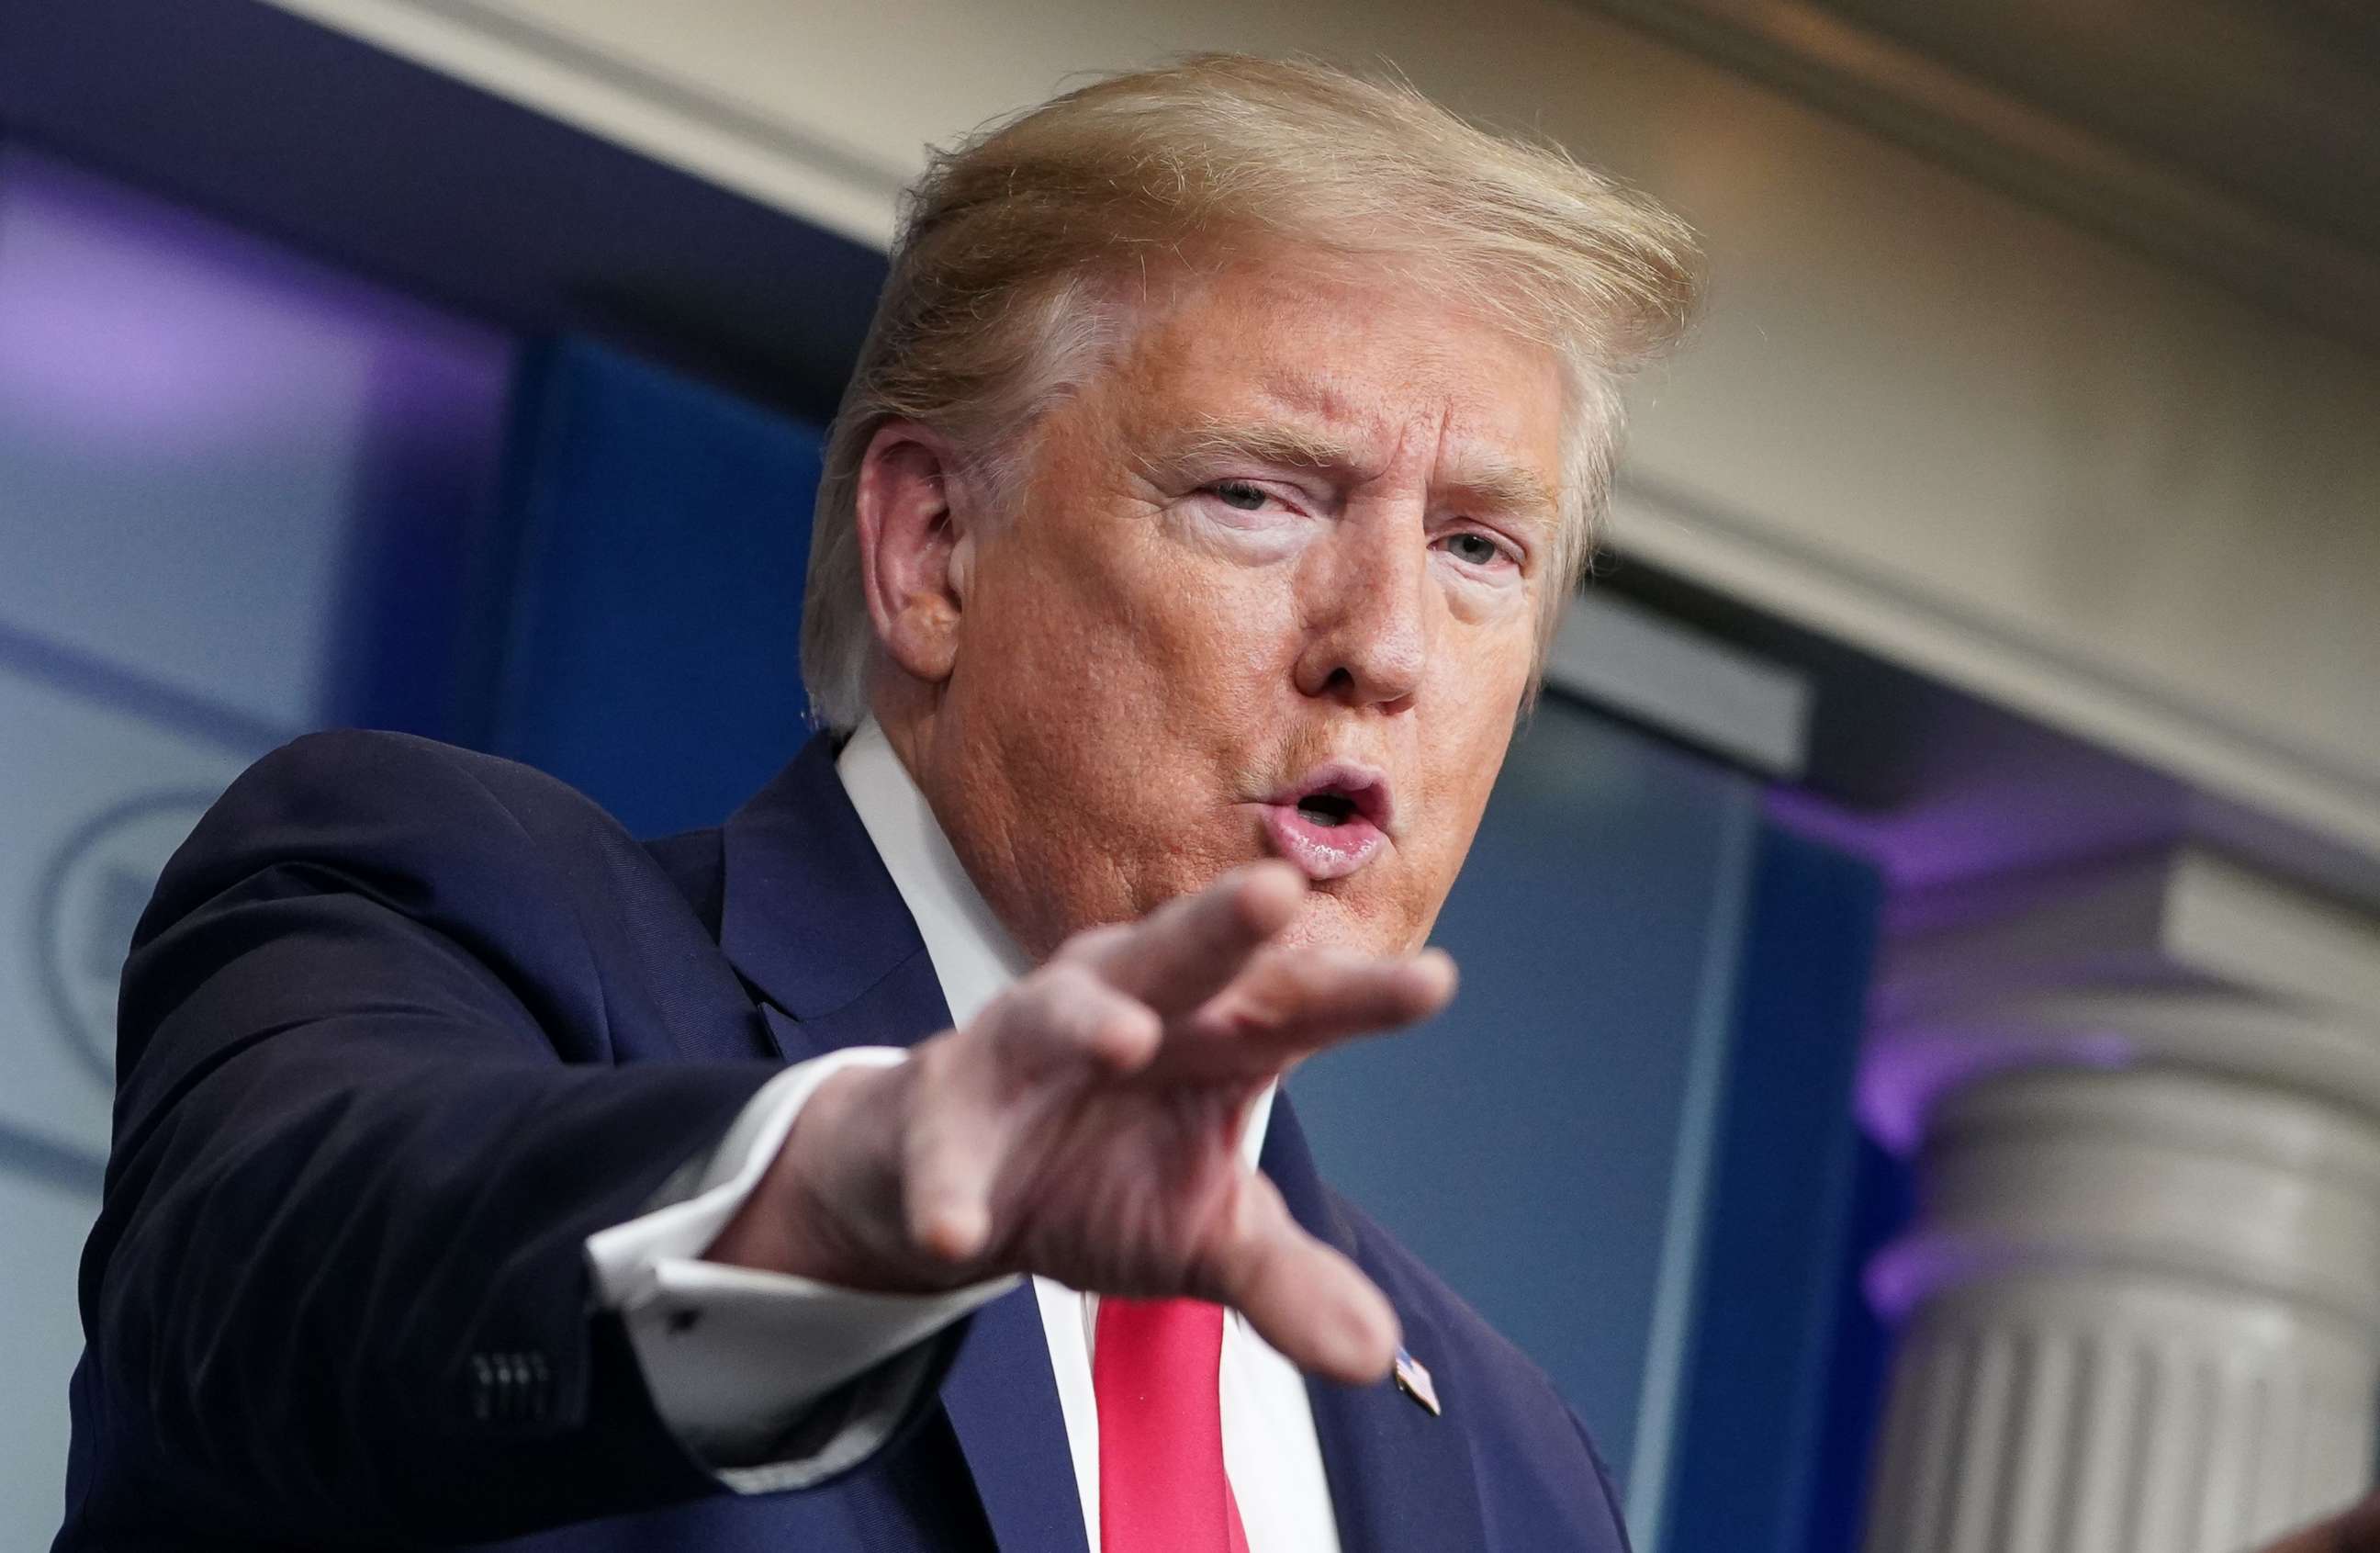 PHOTO: President Donald Trump speaks during the daily briefing on the novel coronavirus, which causes COVID-19, in the Brady Briefing Room of the White House on April 22, 2020, in Washington.